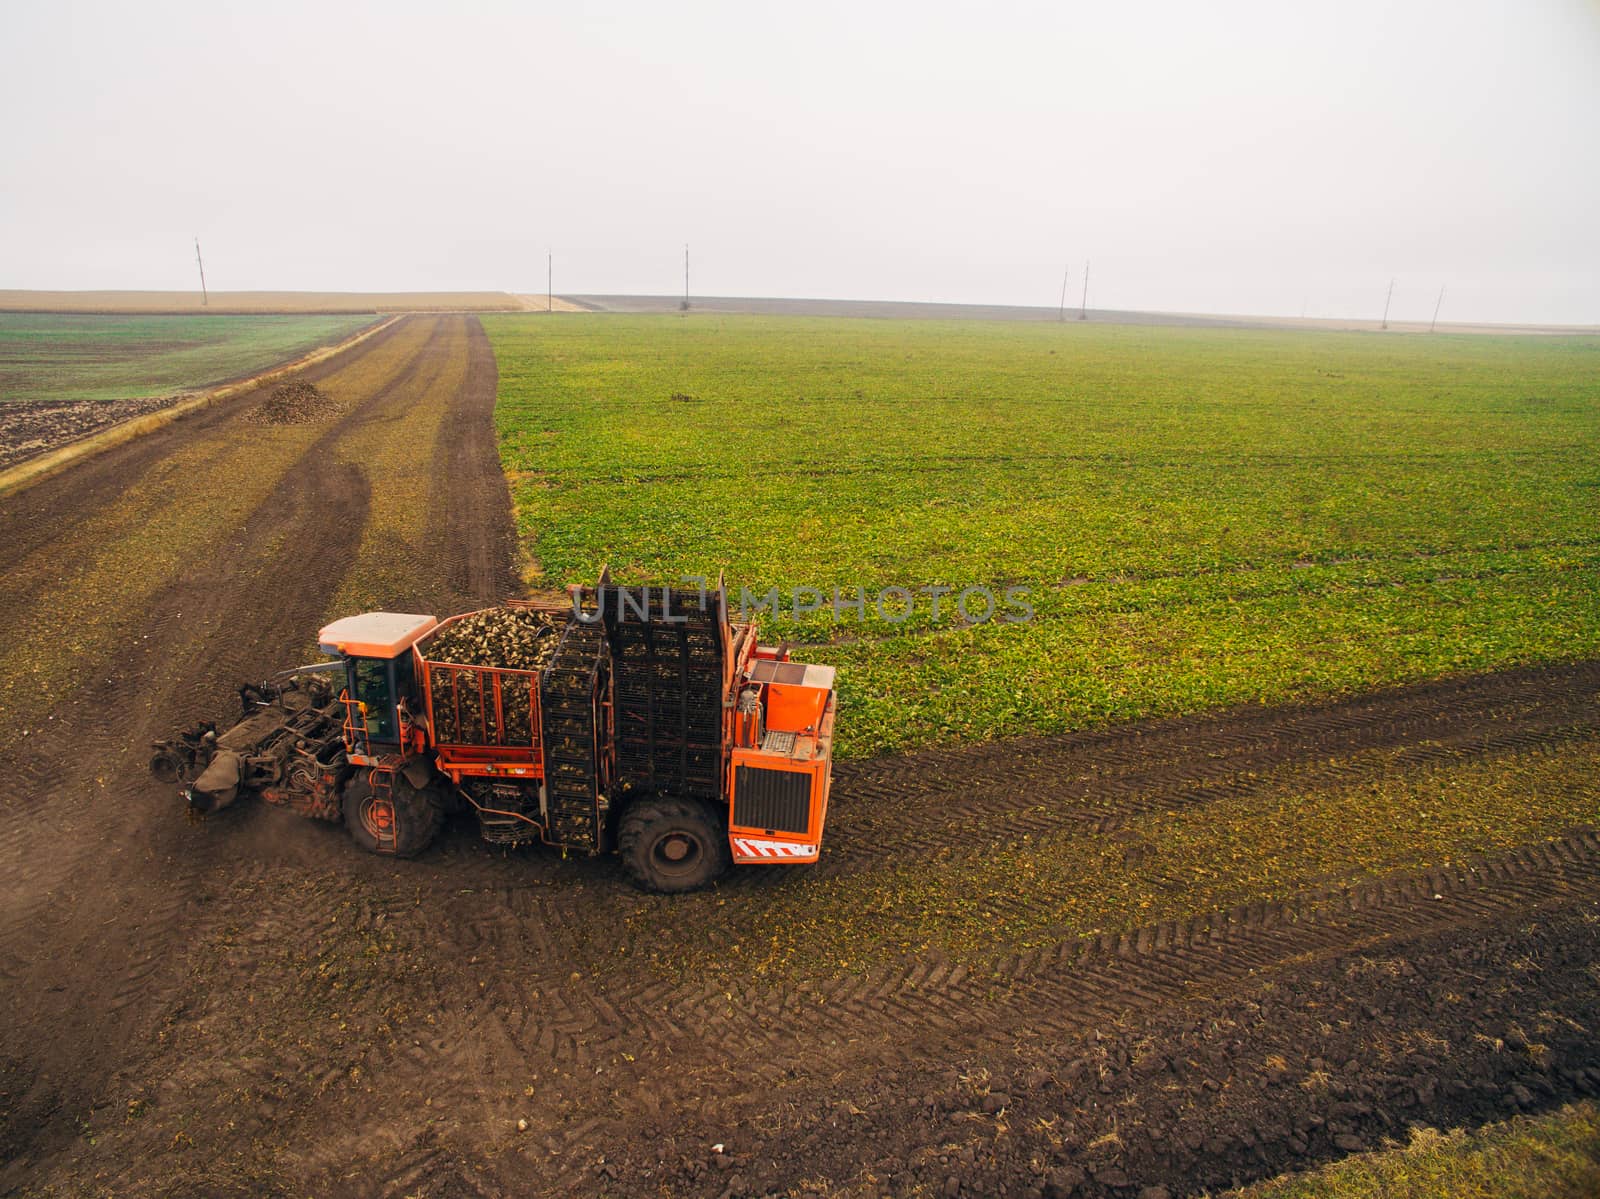 Harvesting Beets in the Green Field. Automated Equipment.